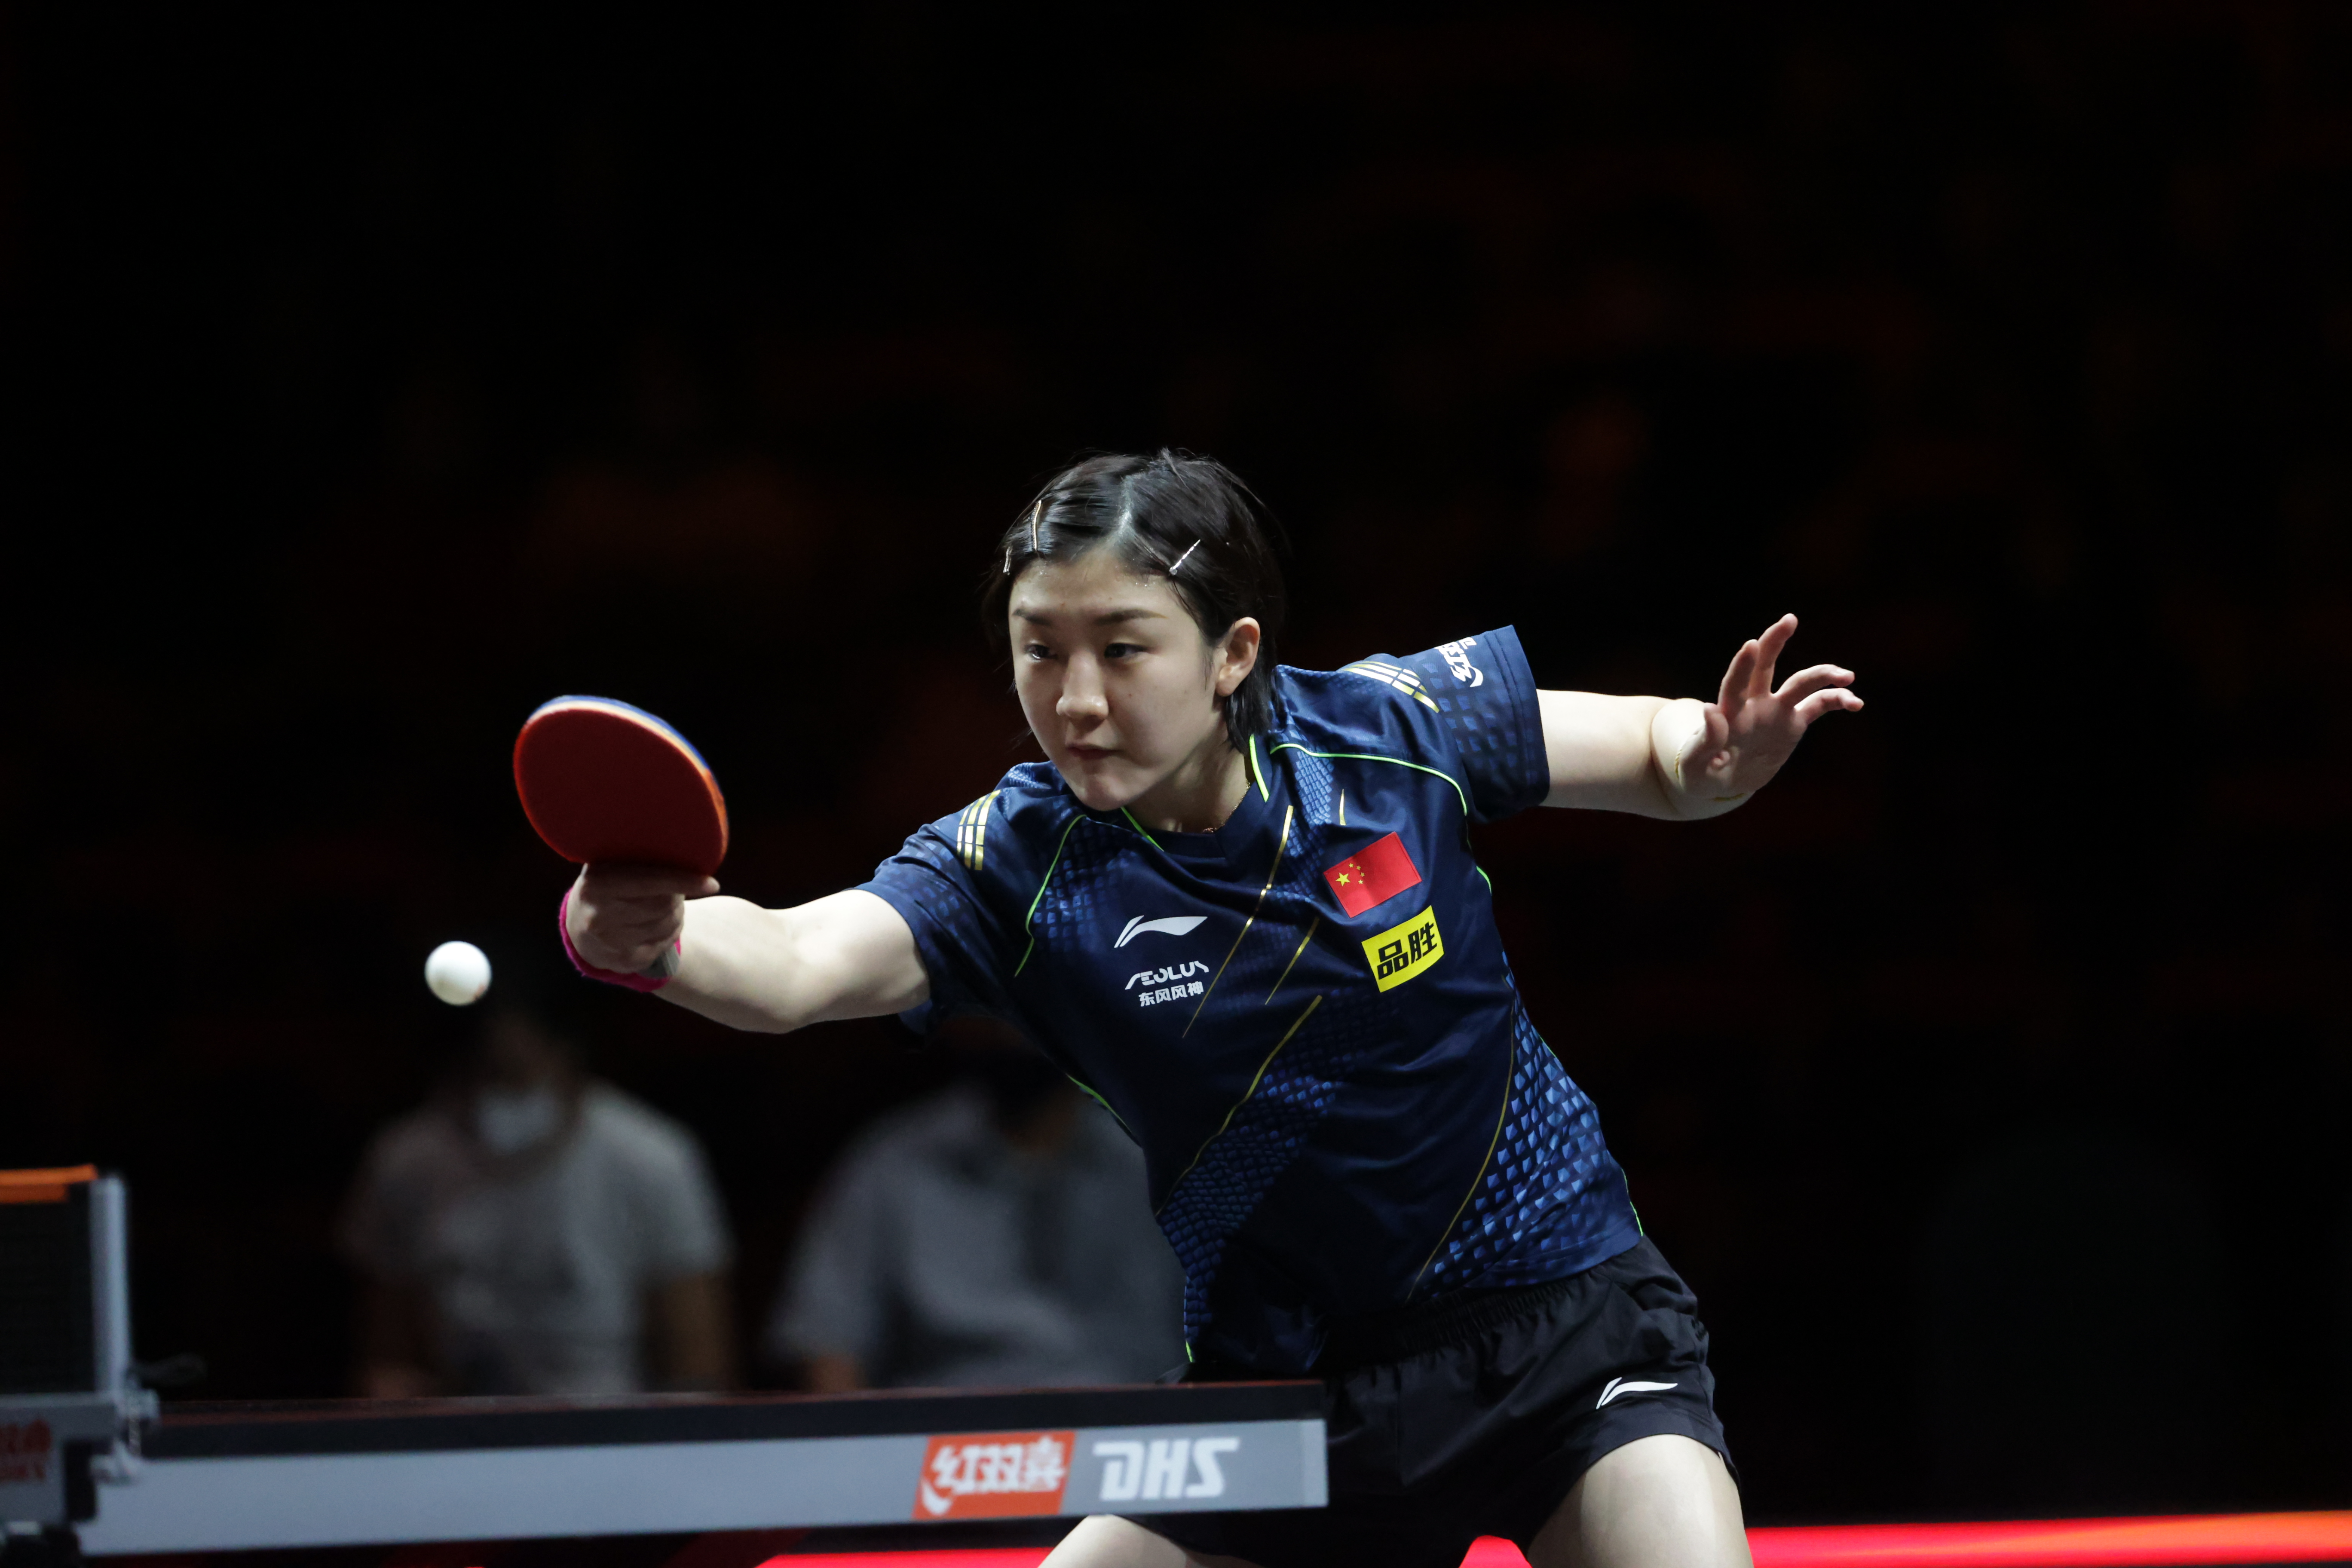 World no 1 Chen Meng knocks out Japanese favourite Kasumi Ishikawa, to advance to the last 8 of the WTT Cup Finals!